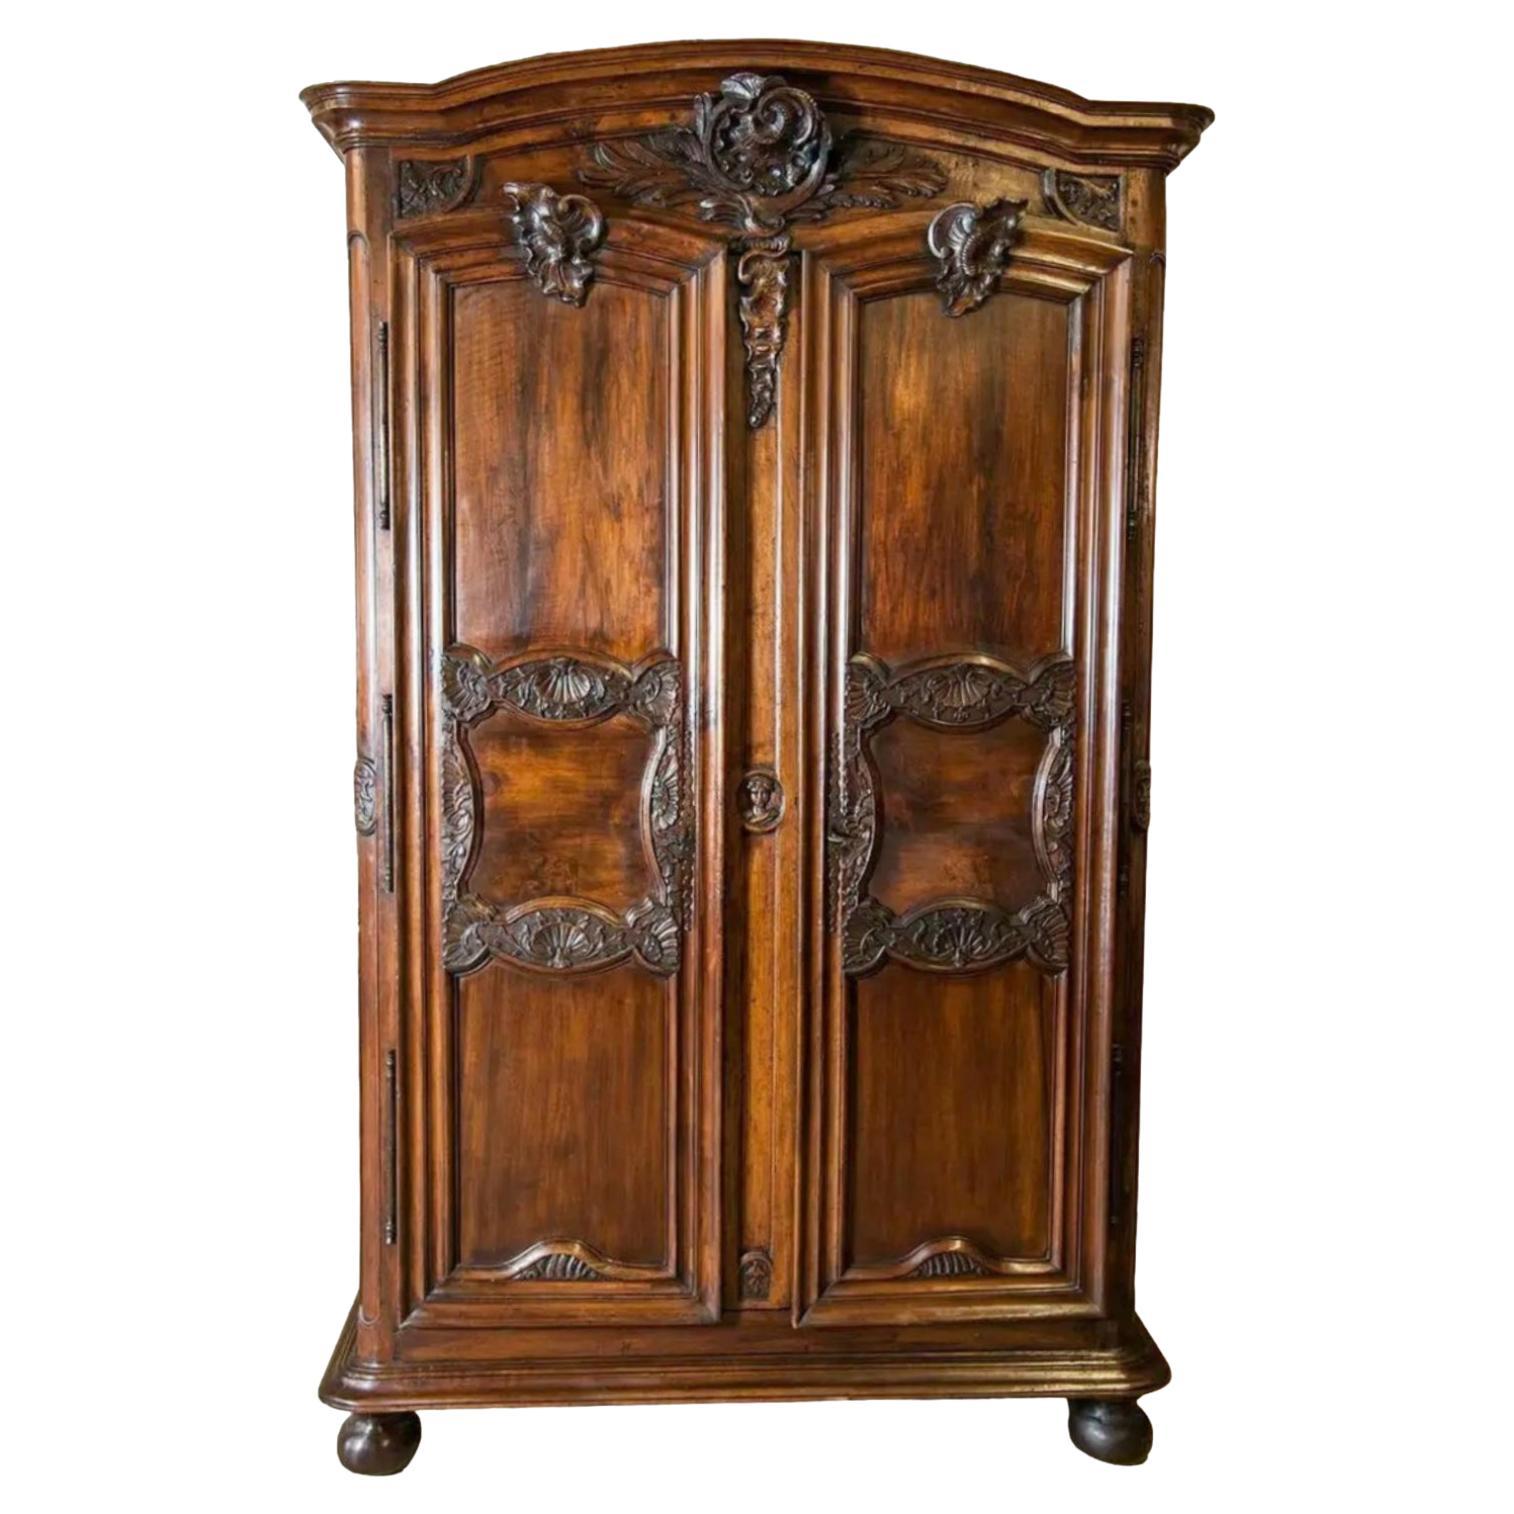 Exceptional 18th Century French Régence Period Walnut Chateau Lyonnaise Armoire For Sale